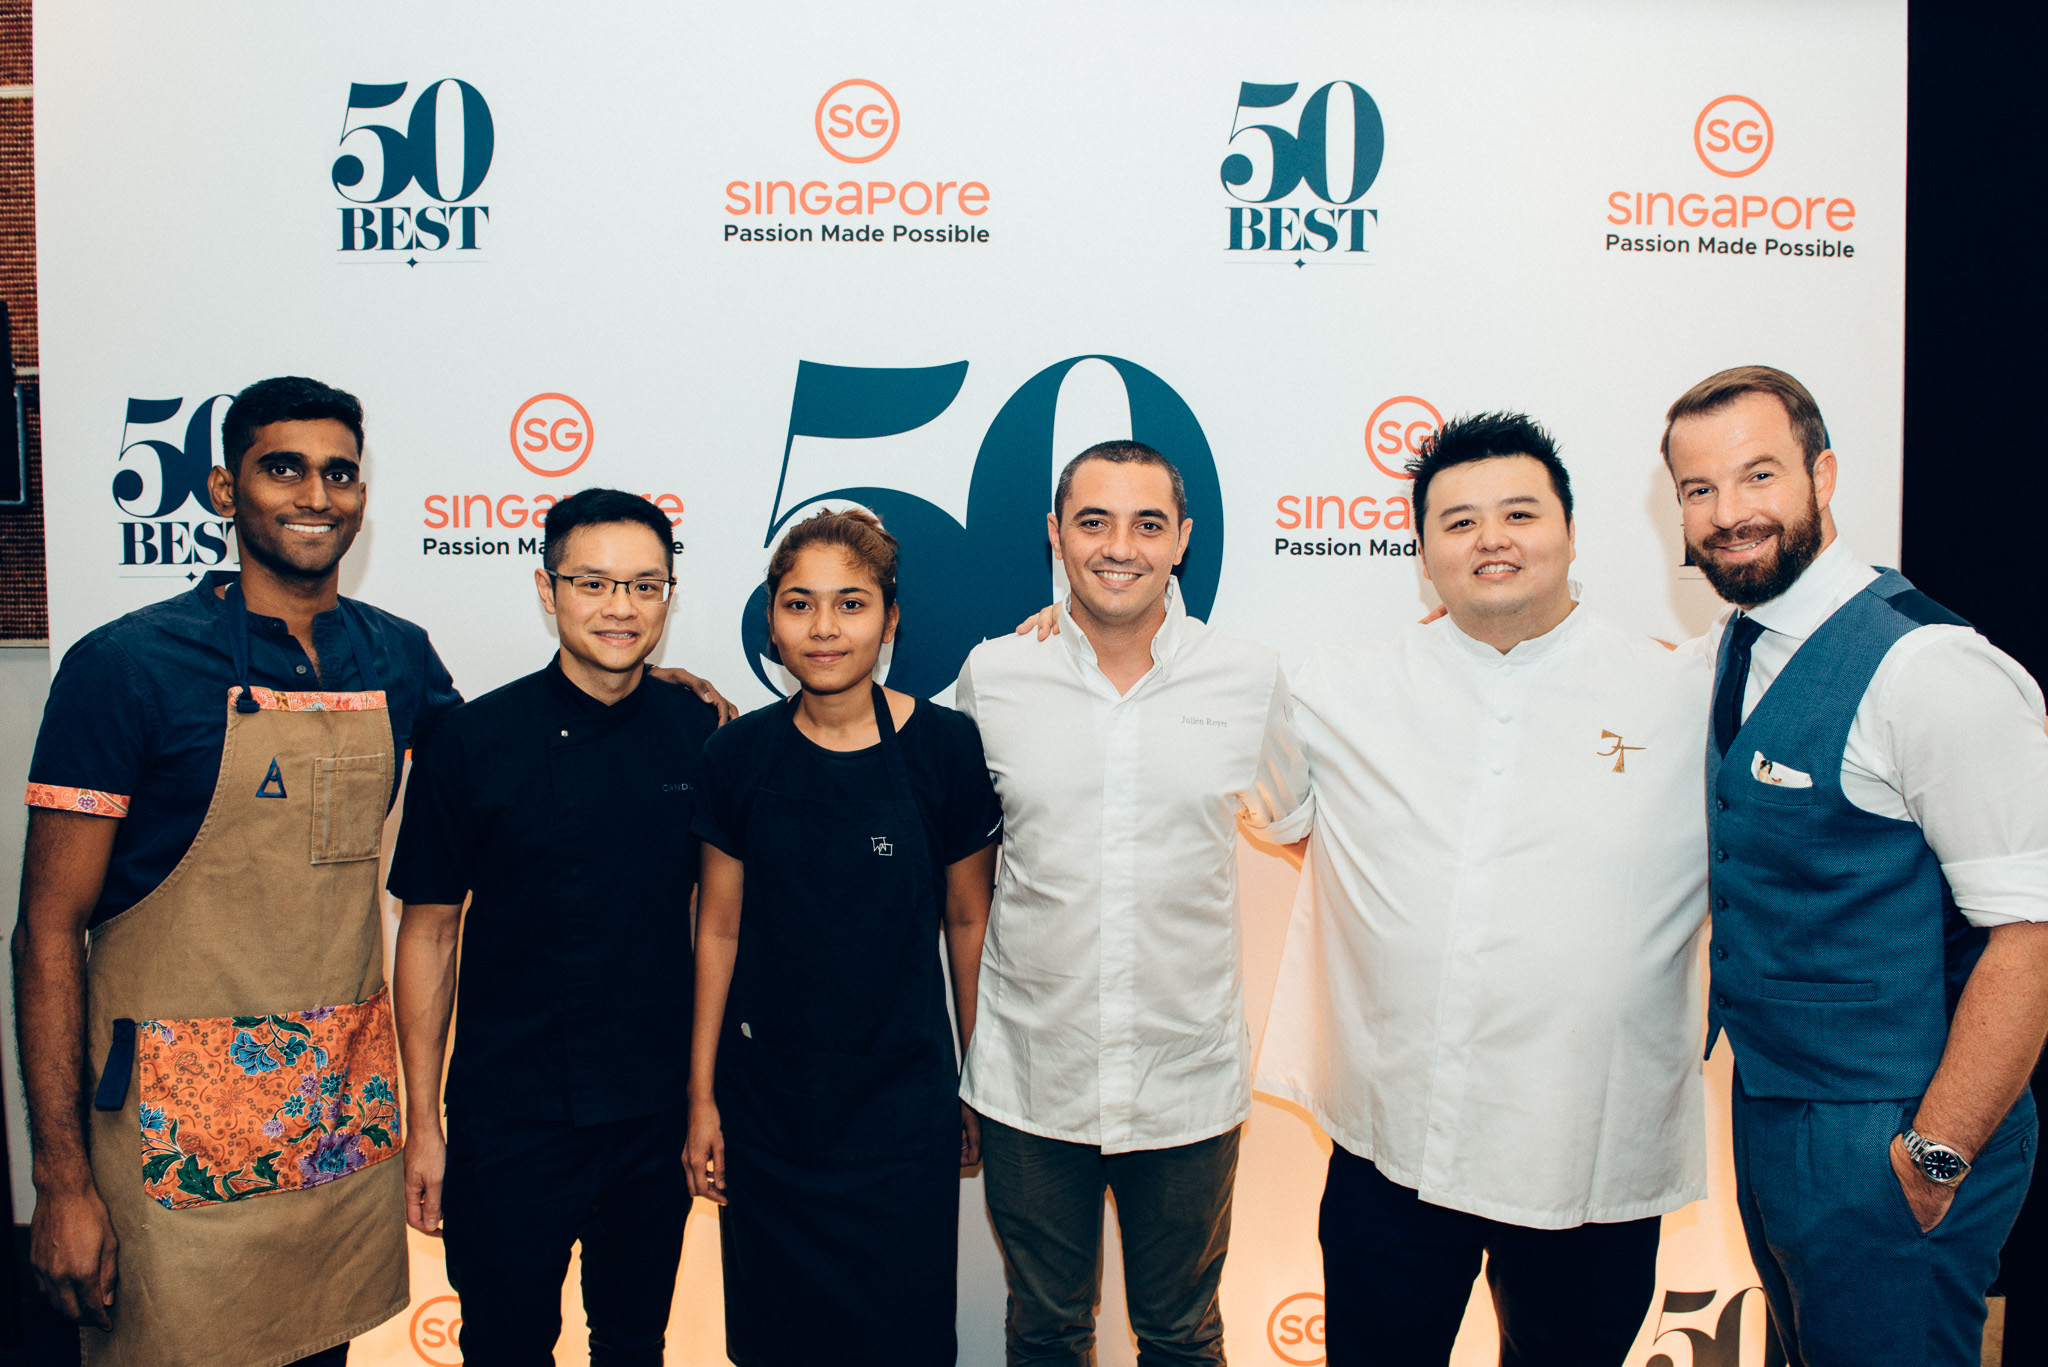 SINGAPORE bartenders and chefs